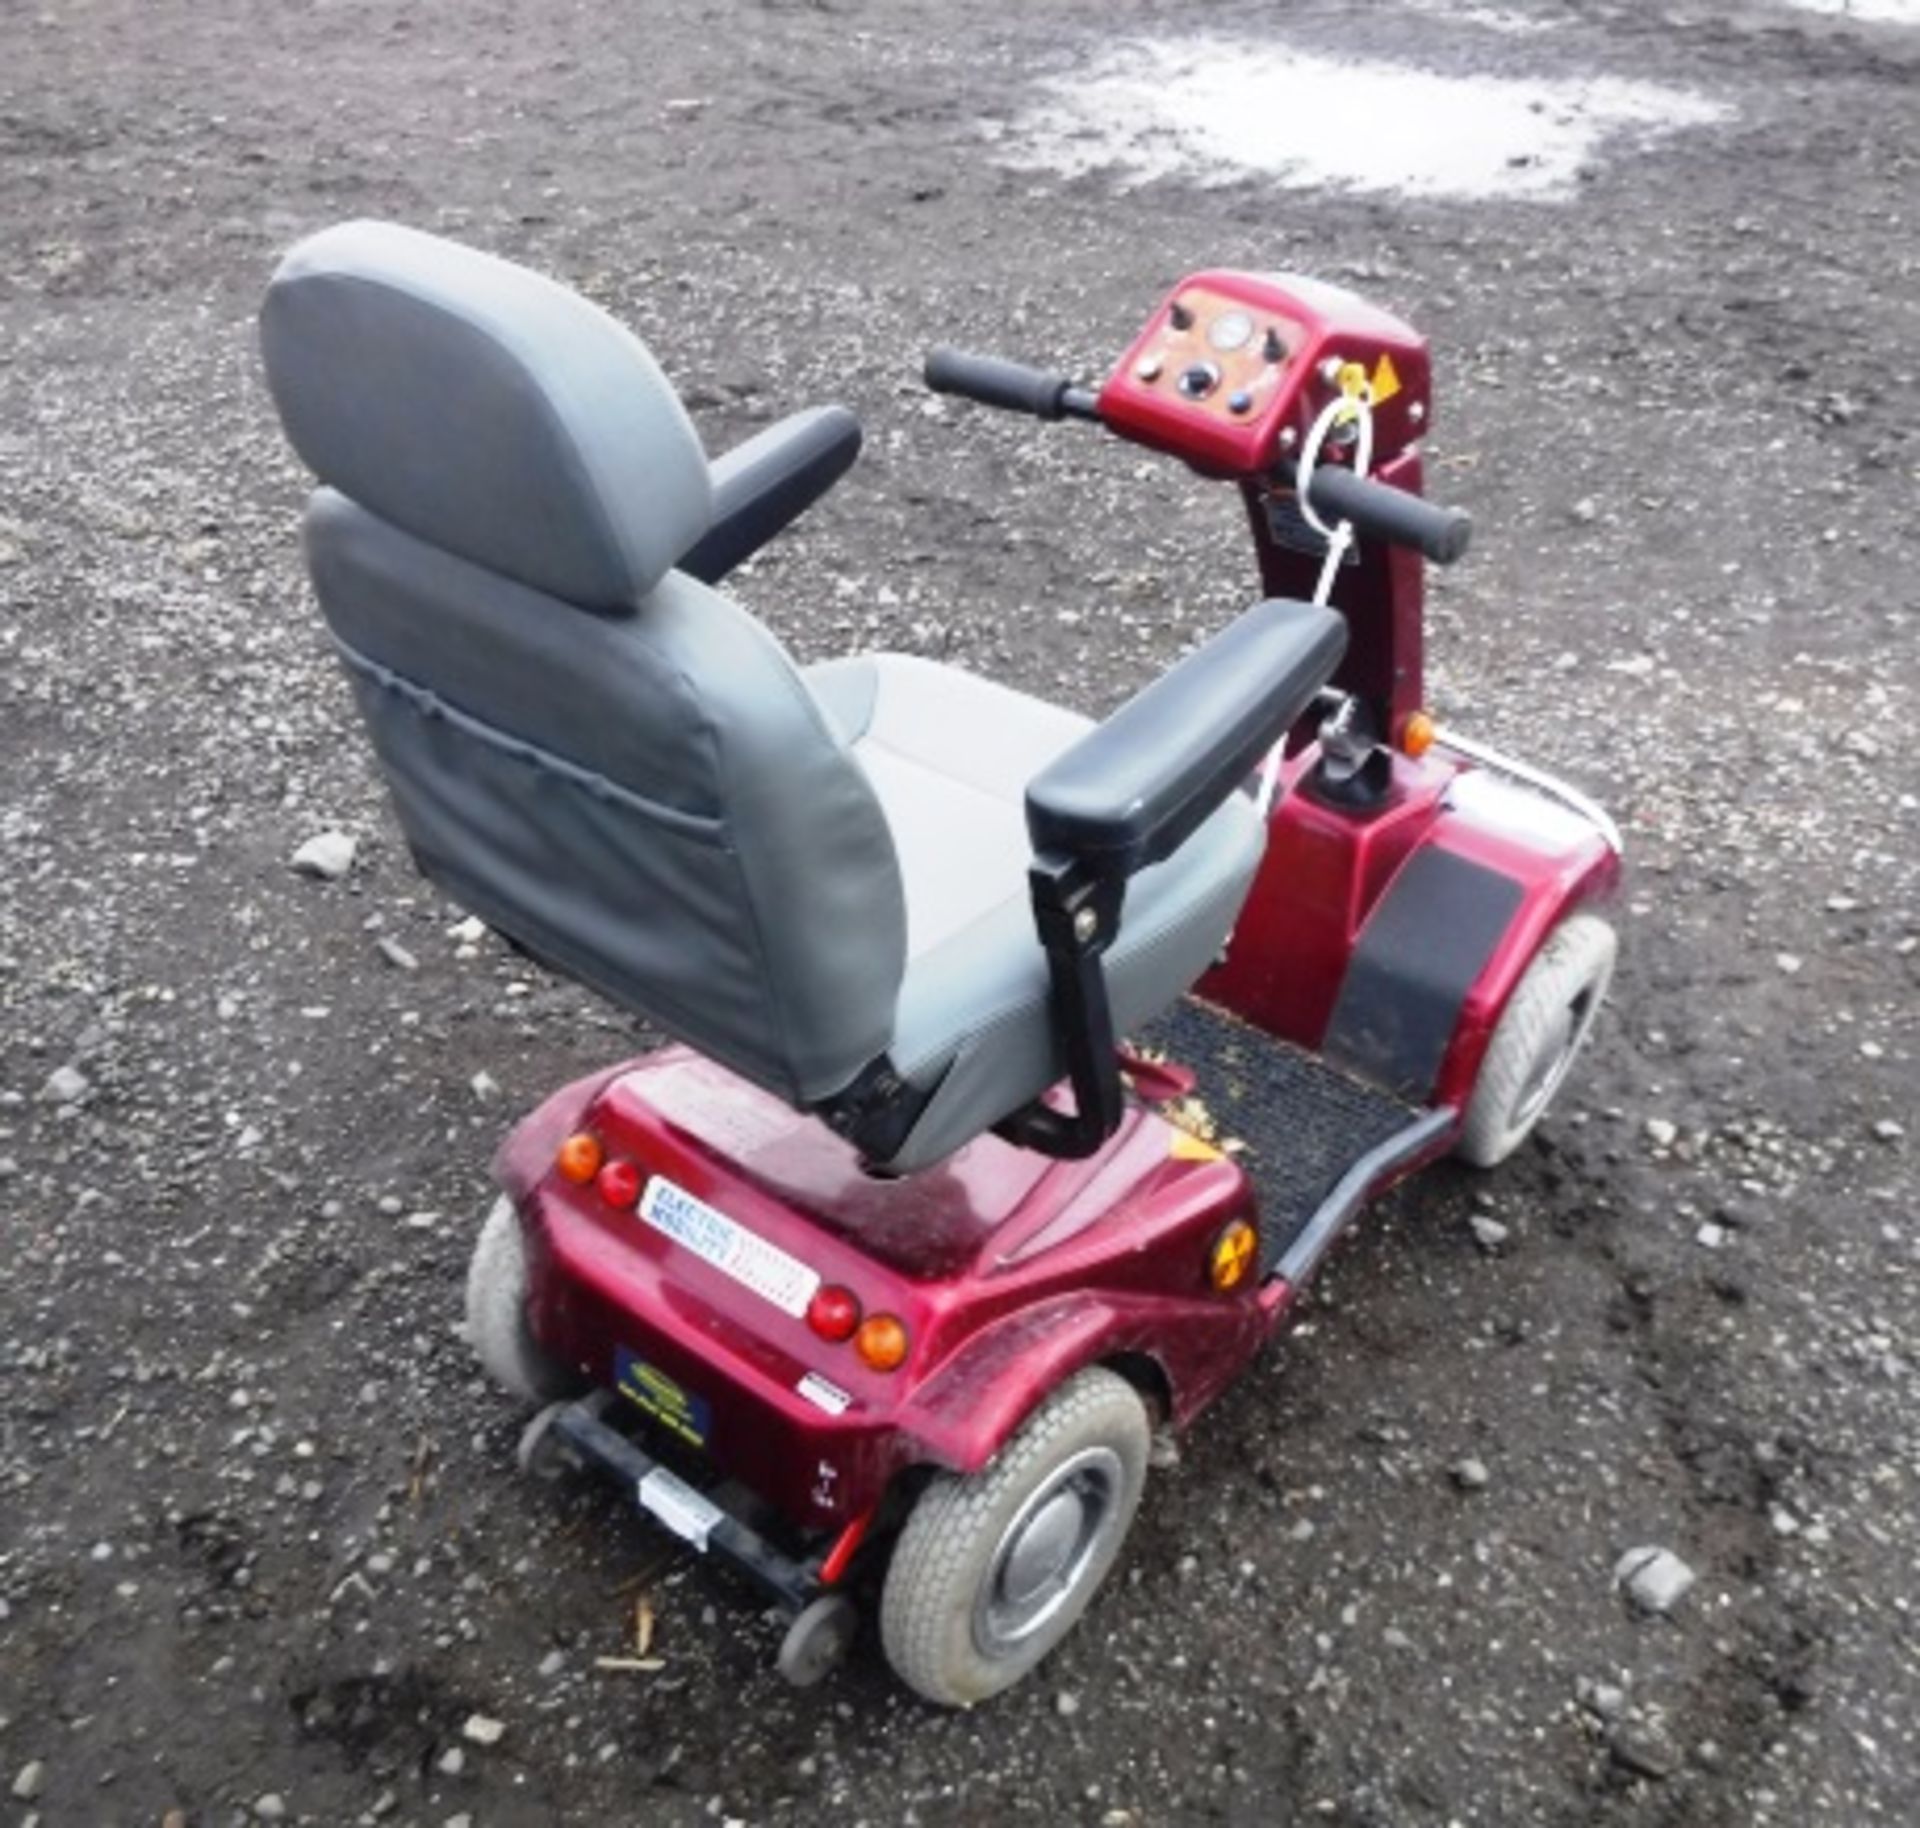 RED MOBILITY SCOOTER, WITH KEYS, NO CHARGER, MINOR DENTS / SCRATCHES, ELECTRICS WORKING - Image 2 of 3